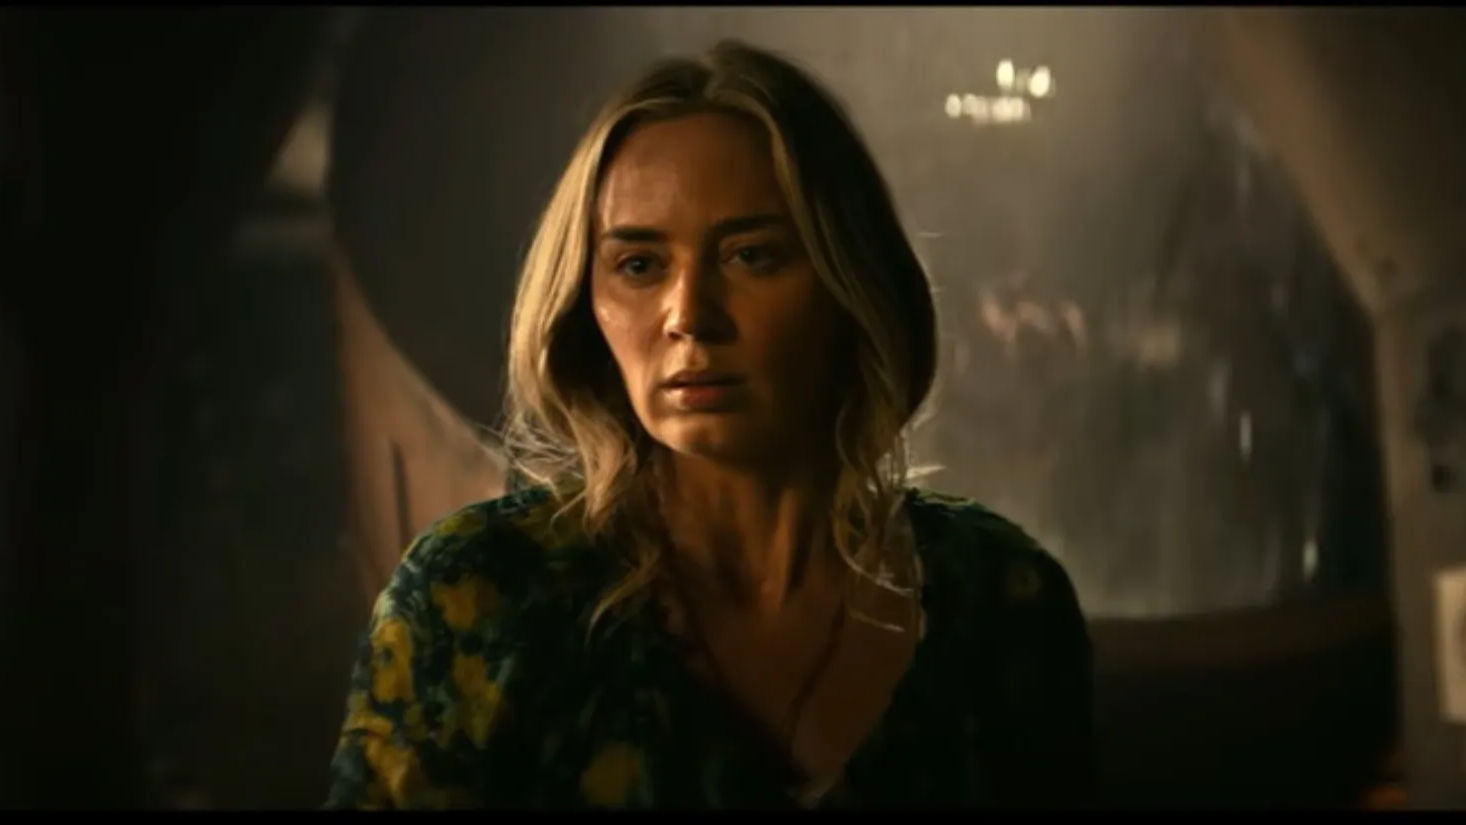 ‘A Quiet Place Part II’ breaks American box office as COVID curbs ease